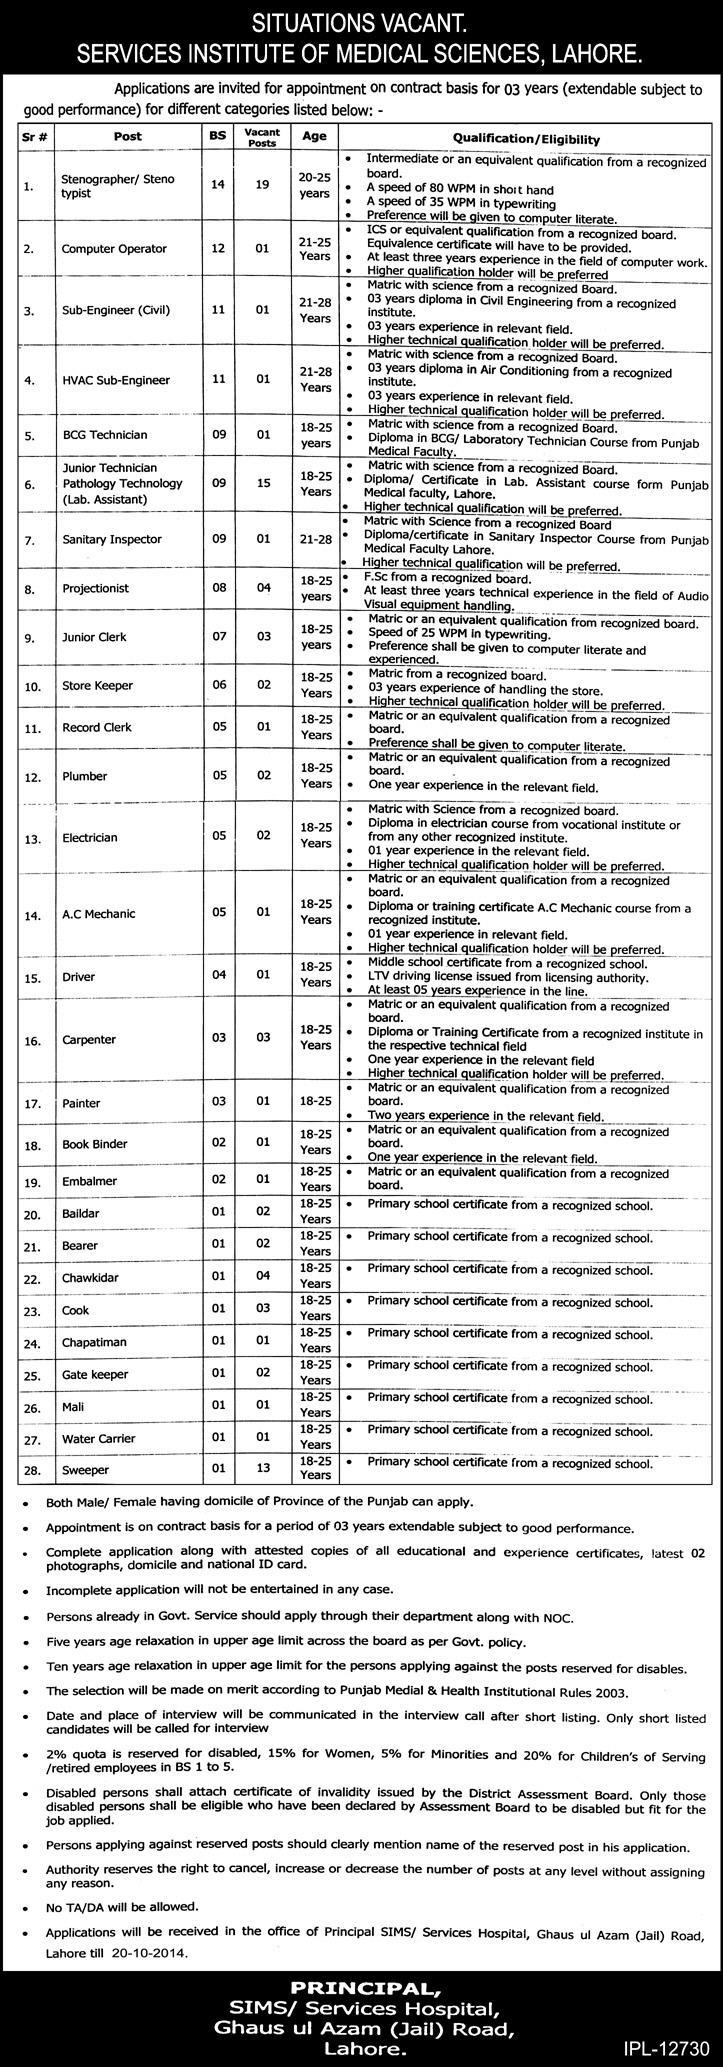 Services Institute of Medical Sciences Lahore Jobs 2014 October Stenographers, Lab Assistants & Others